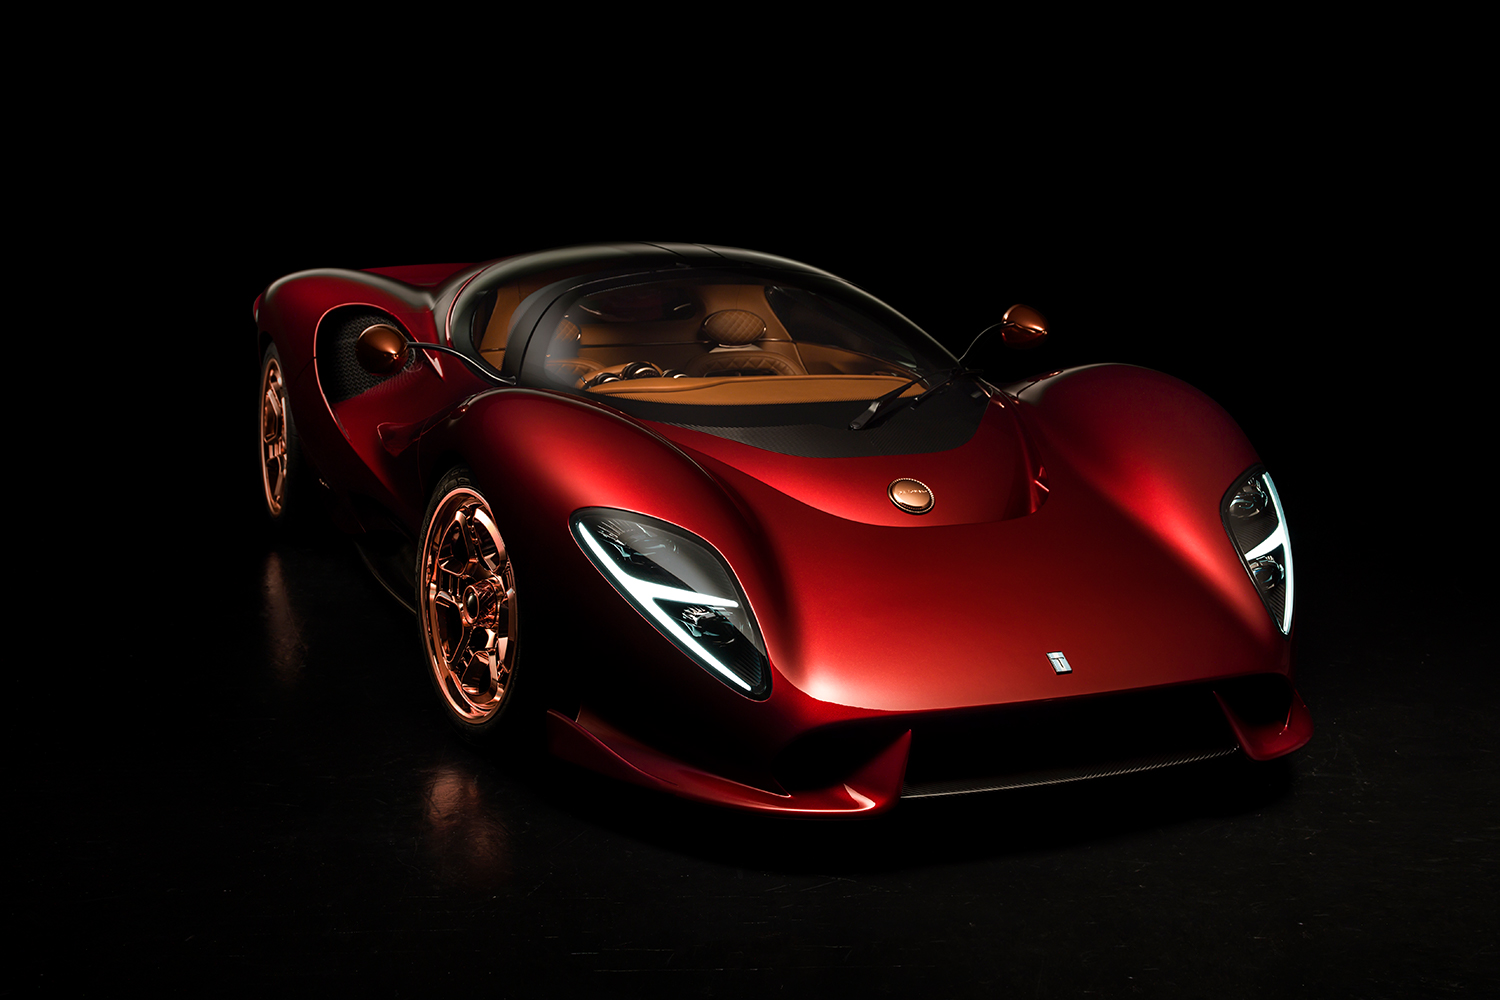 The De Tomaso P72, a supercar that will be built in Germany and begin deliveries in 2023